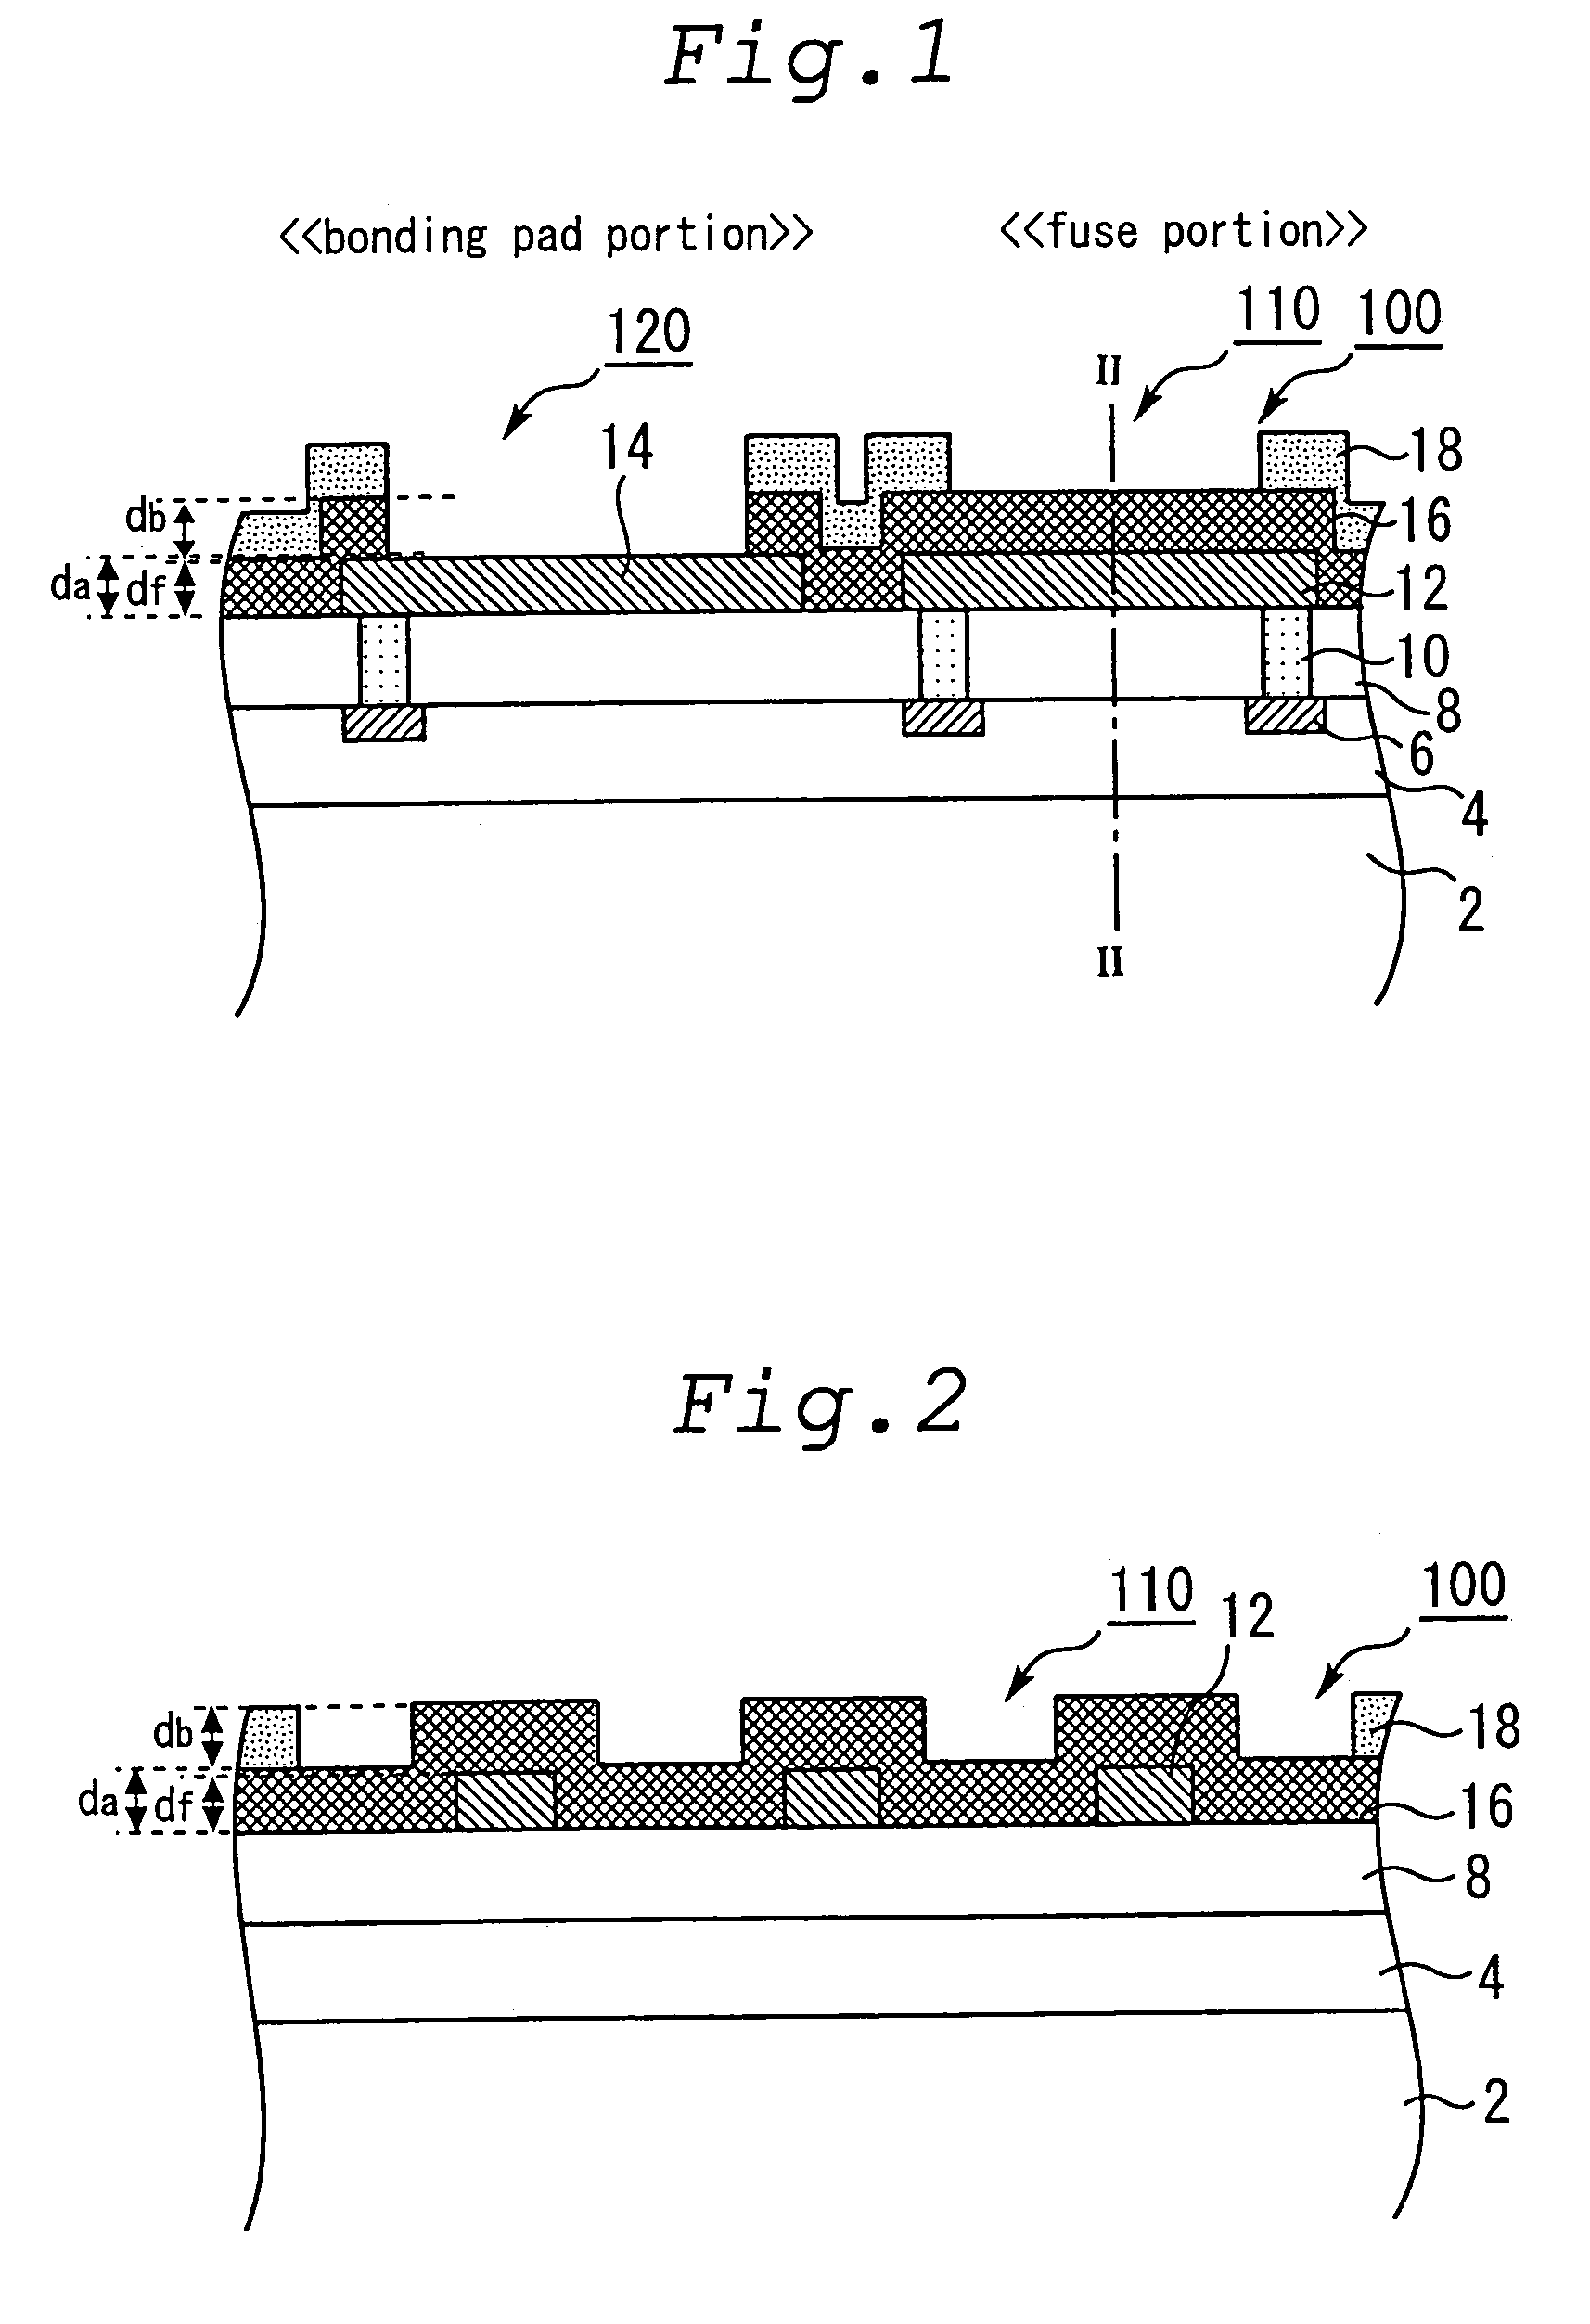 Semiconductor device including fuse elements and bonding pad